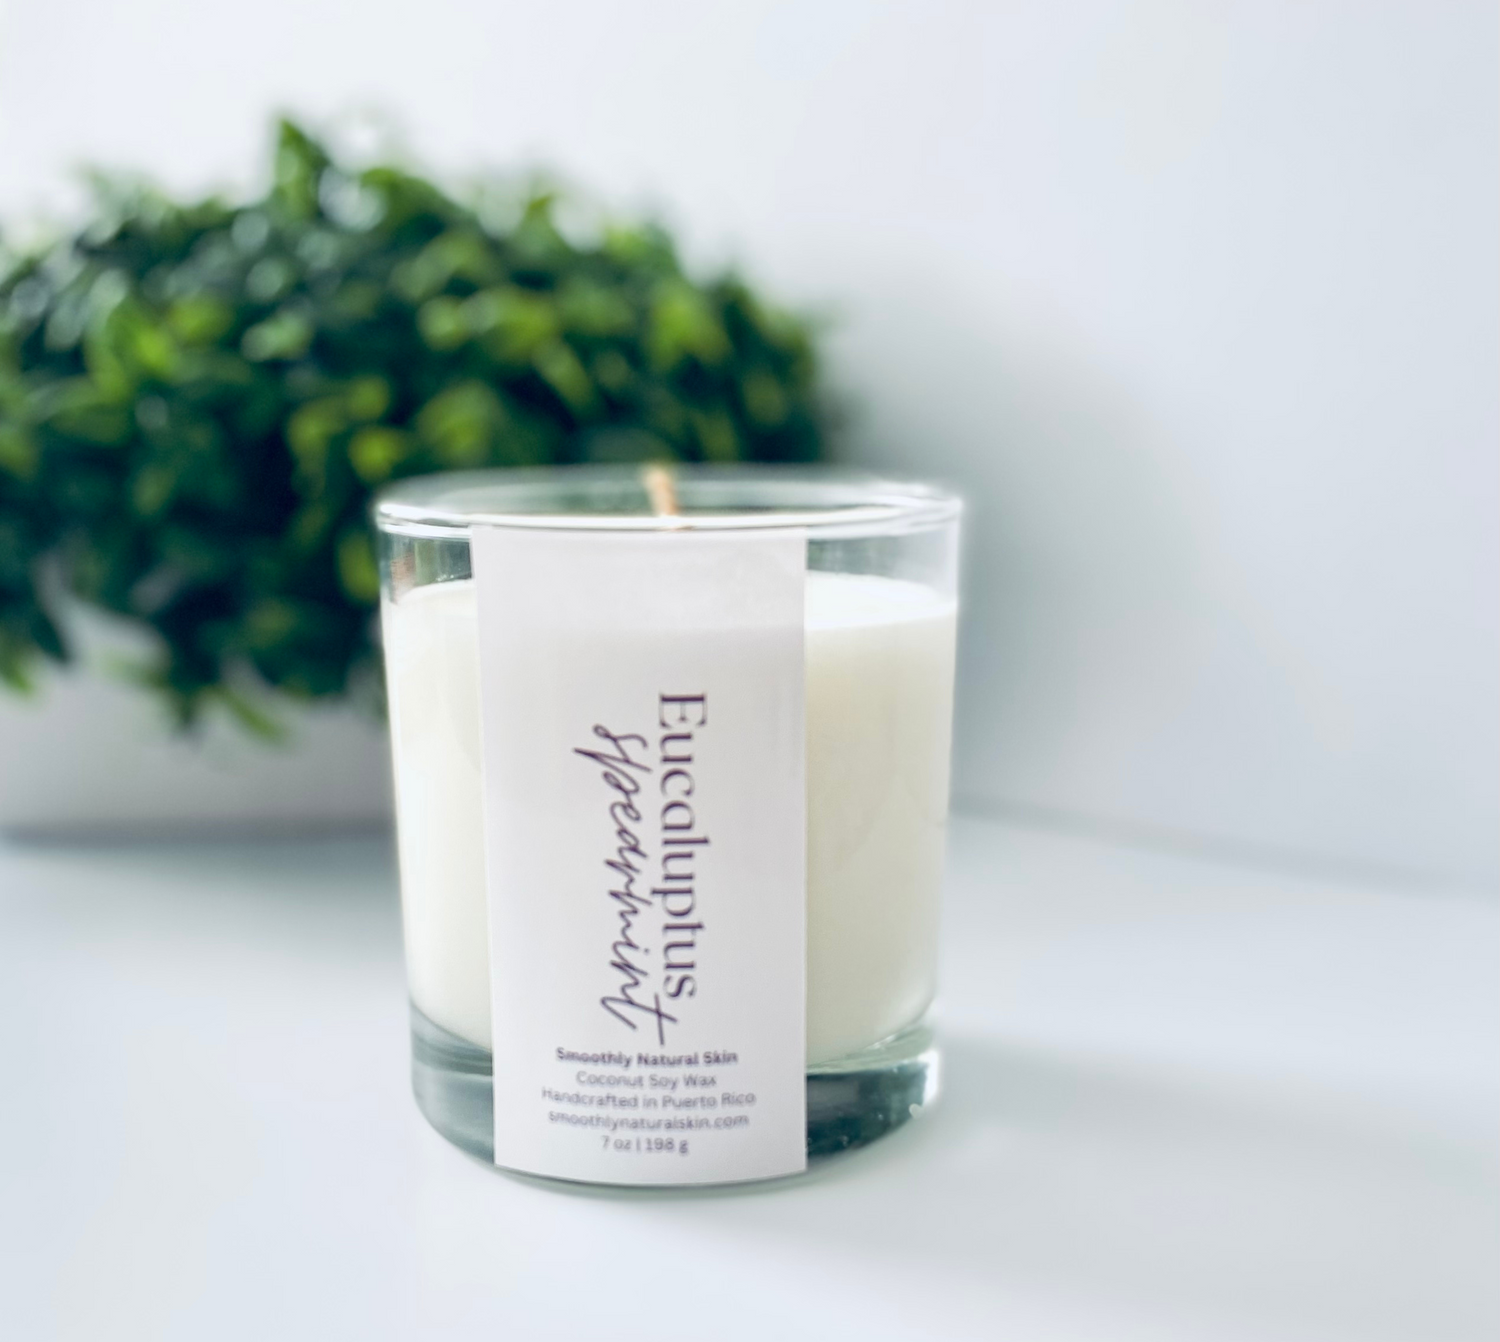 Eucalyptus + Spearmint Candles has a blend of eucalyptus and spearmint with fresh citrus lemon, lavender flowers, and a hint of sage. A Best Seller!